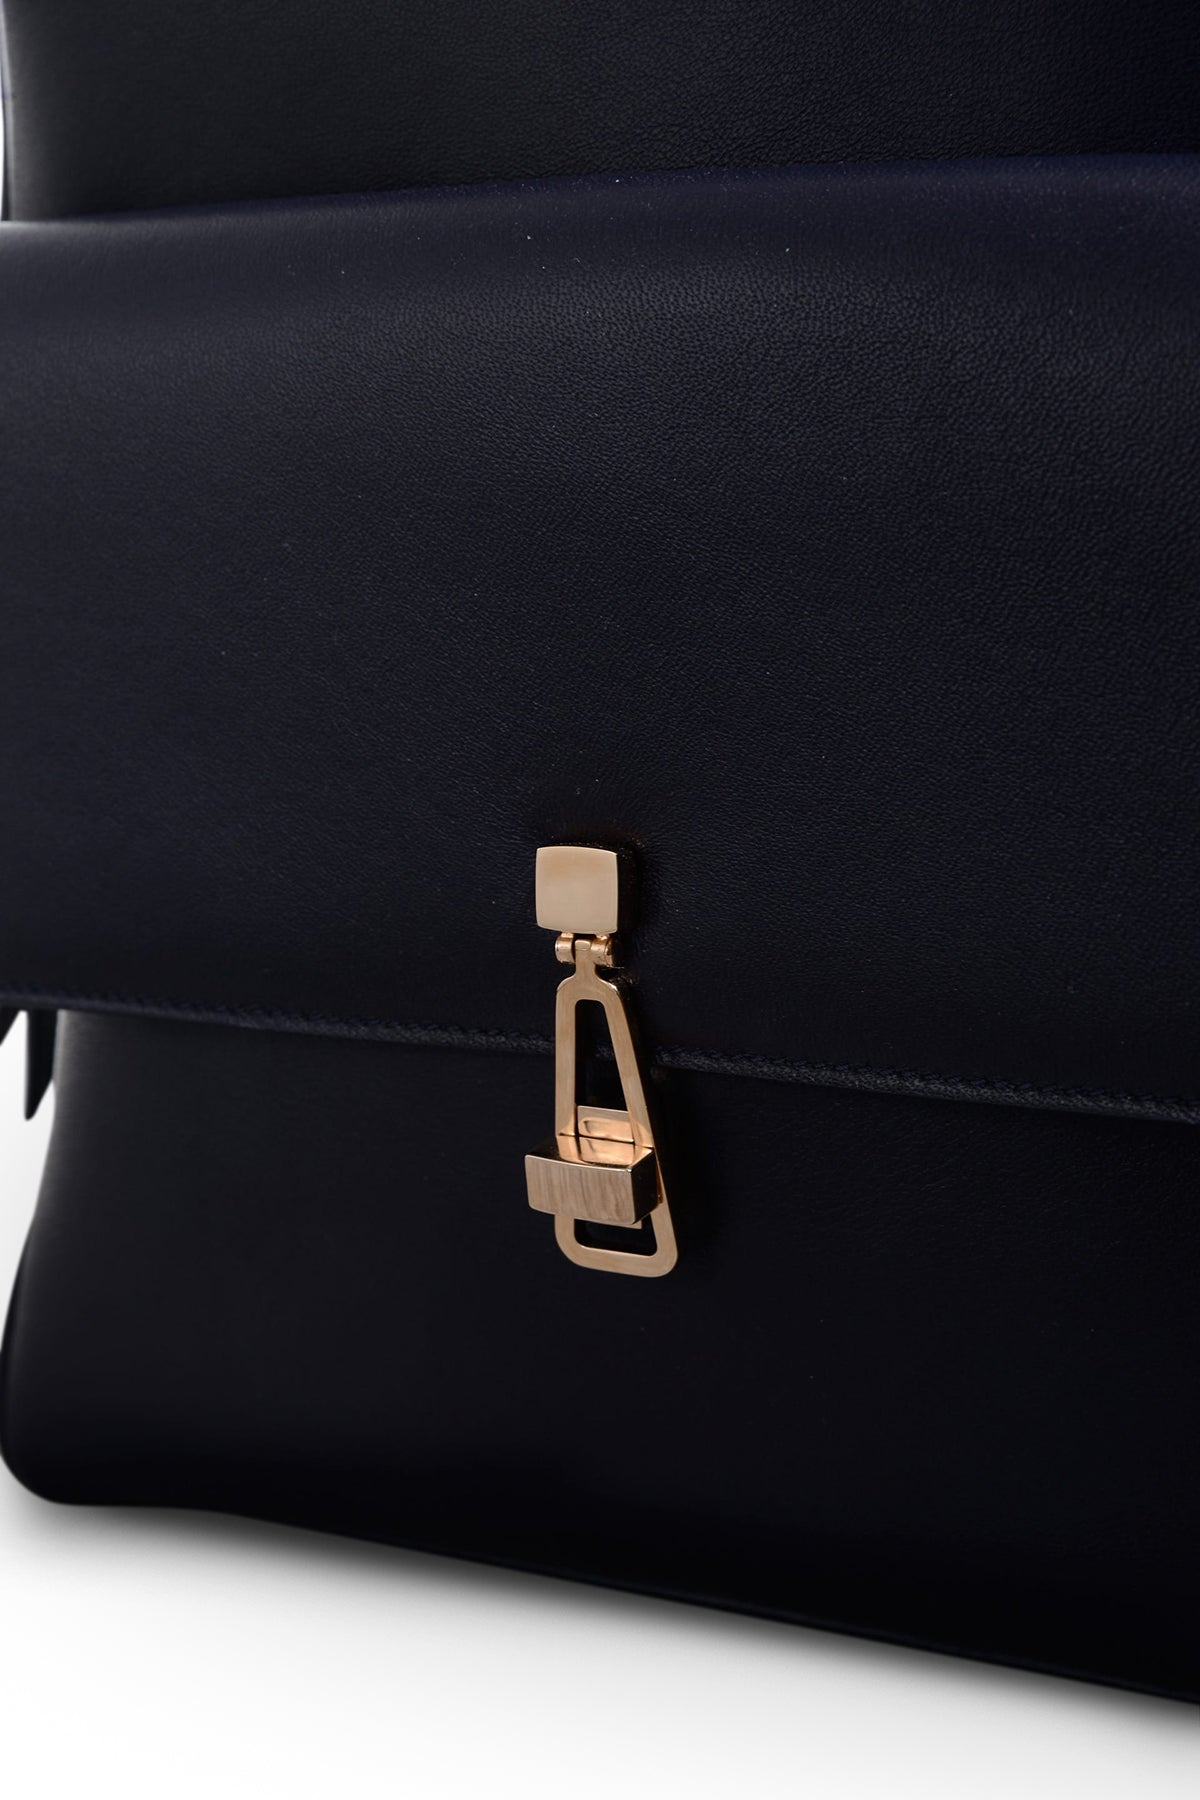 Billie Backpack in Navy Nappa Leather